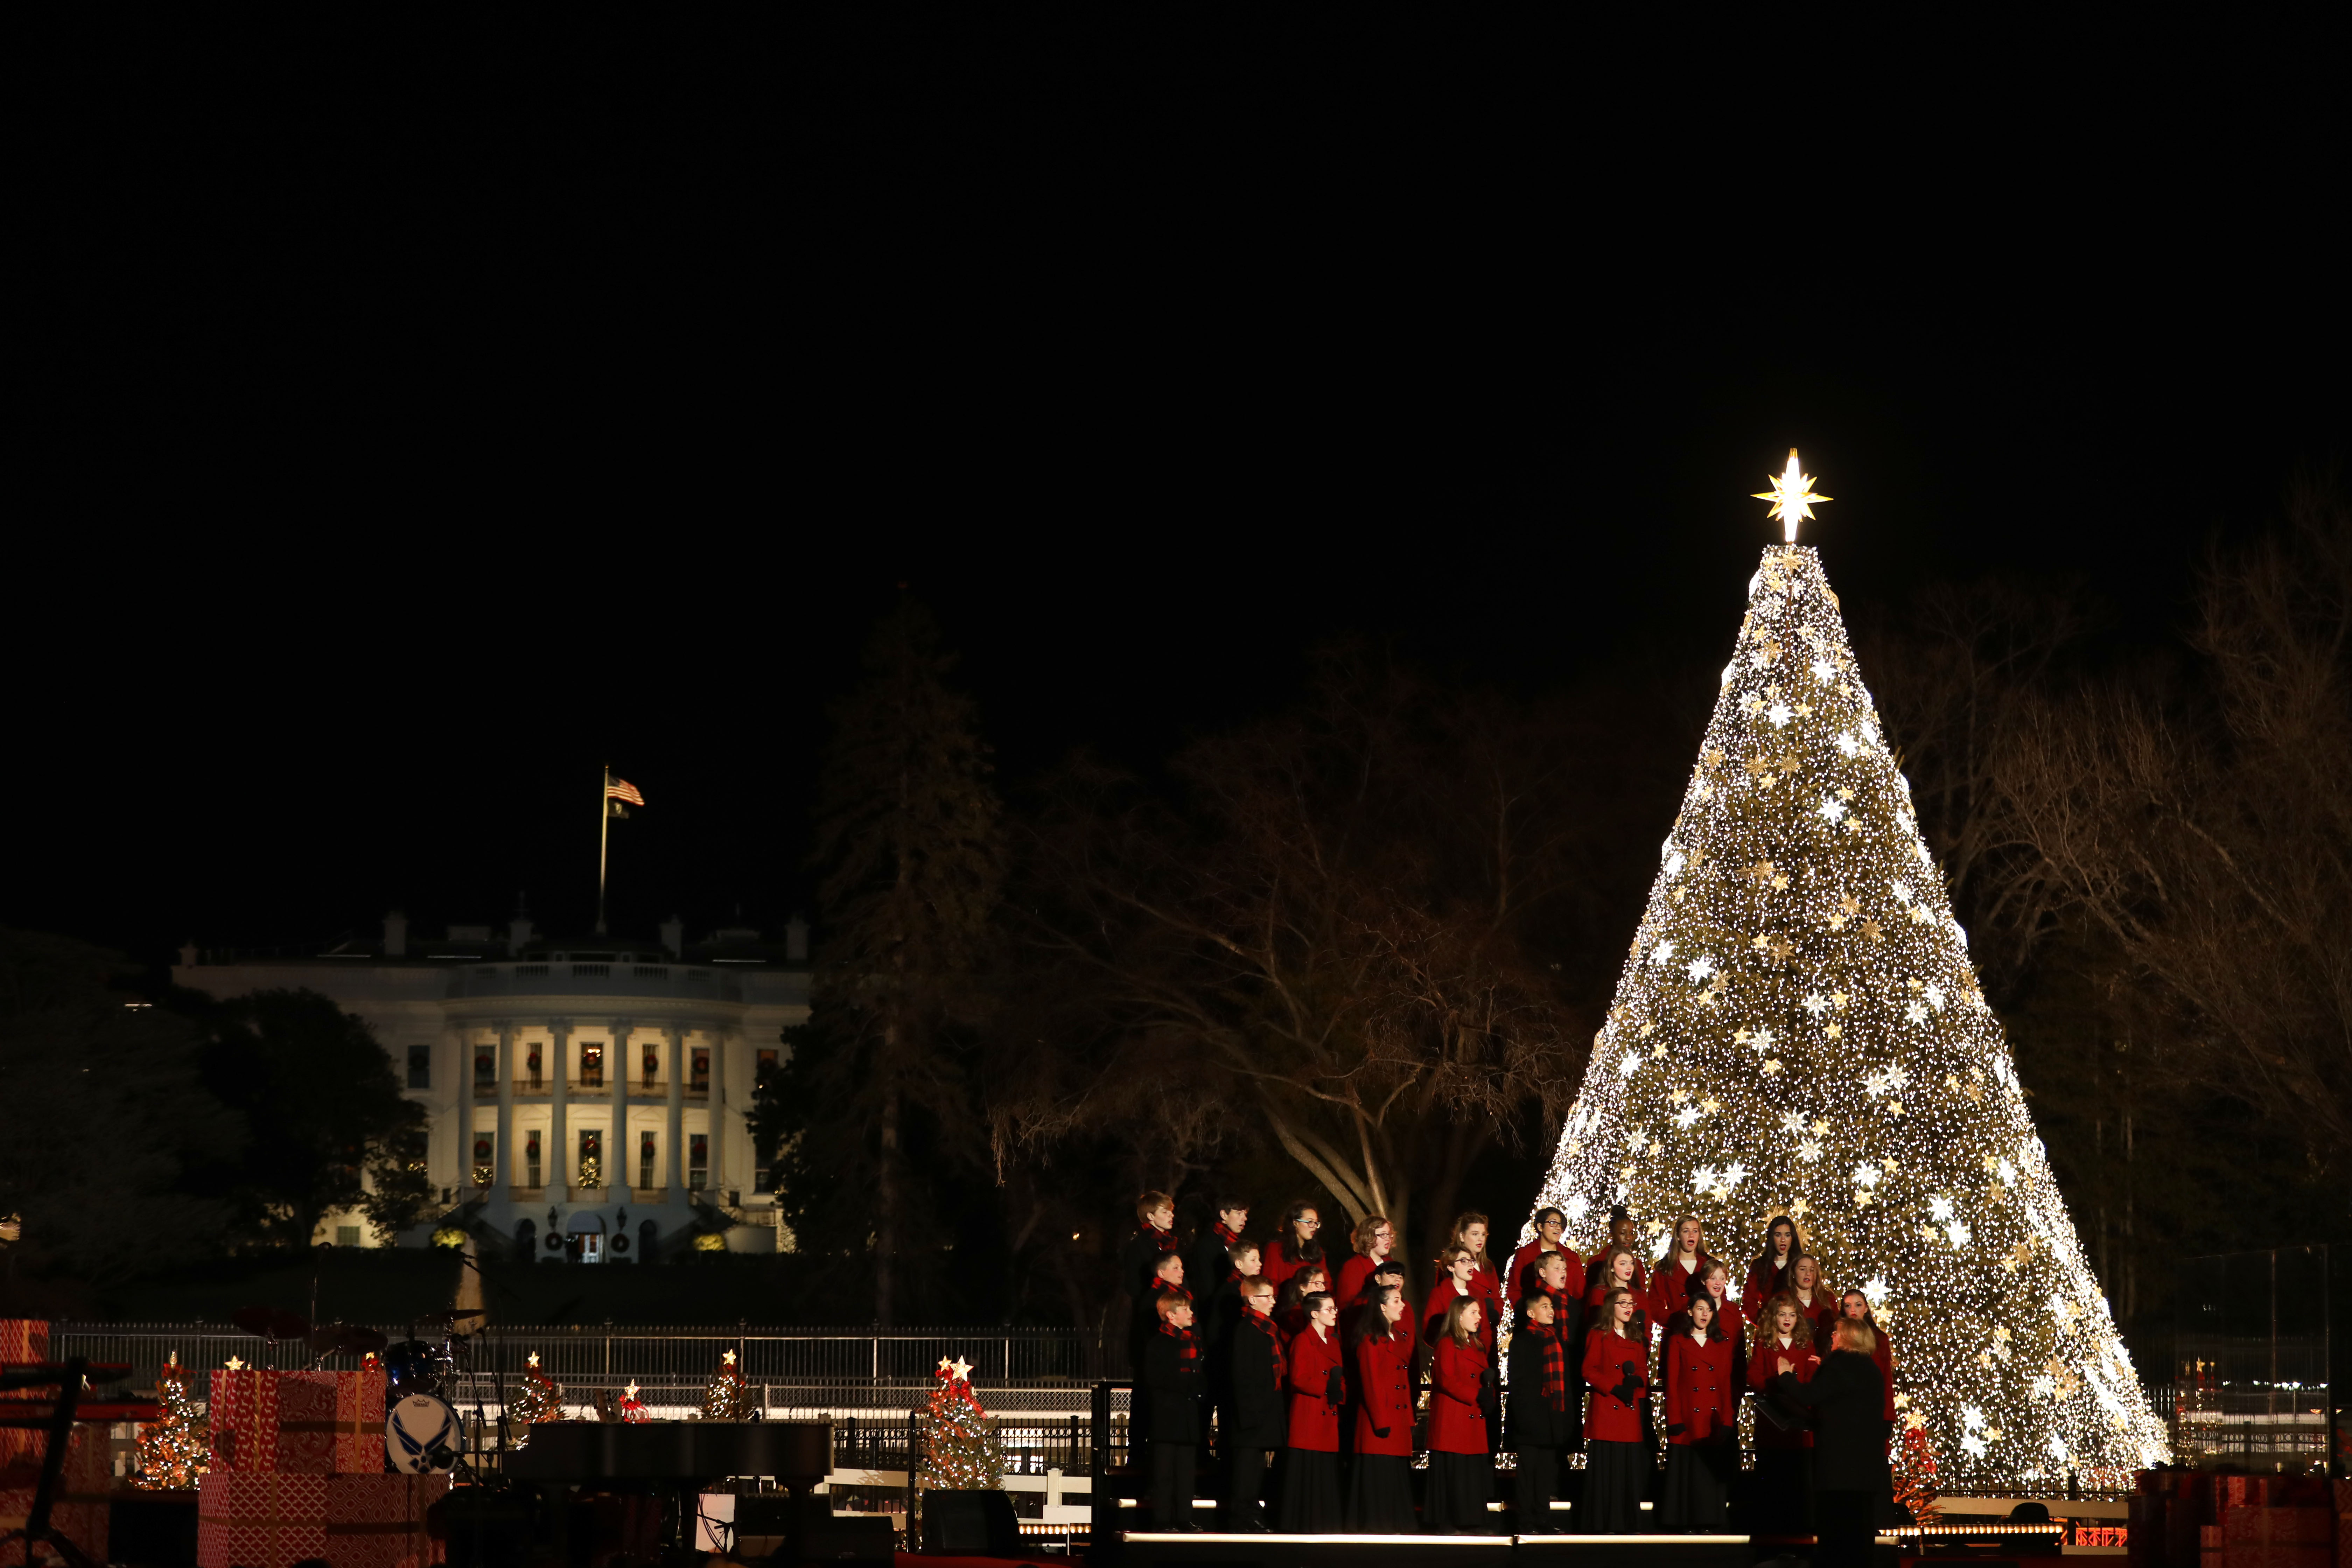 Christmas Tree At White House 2021